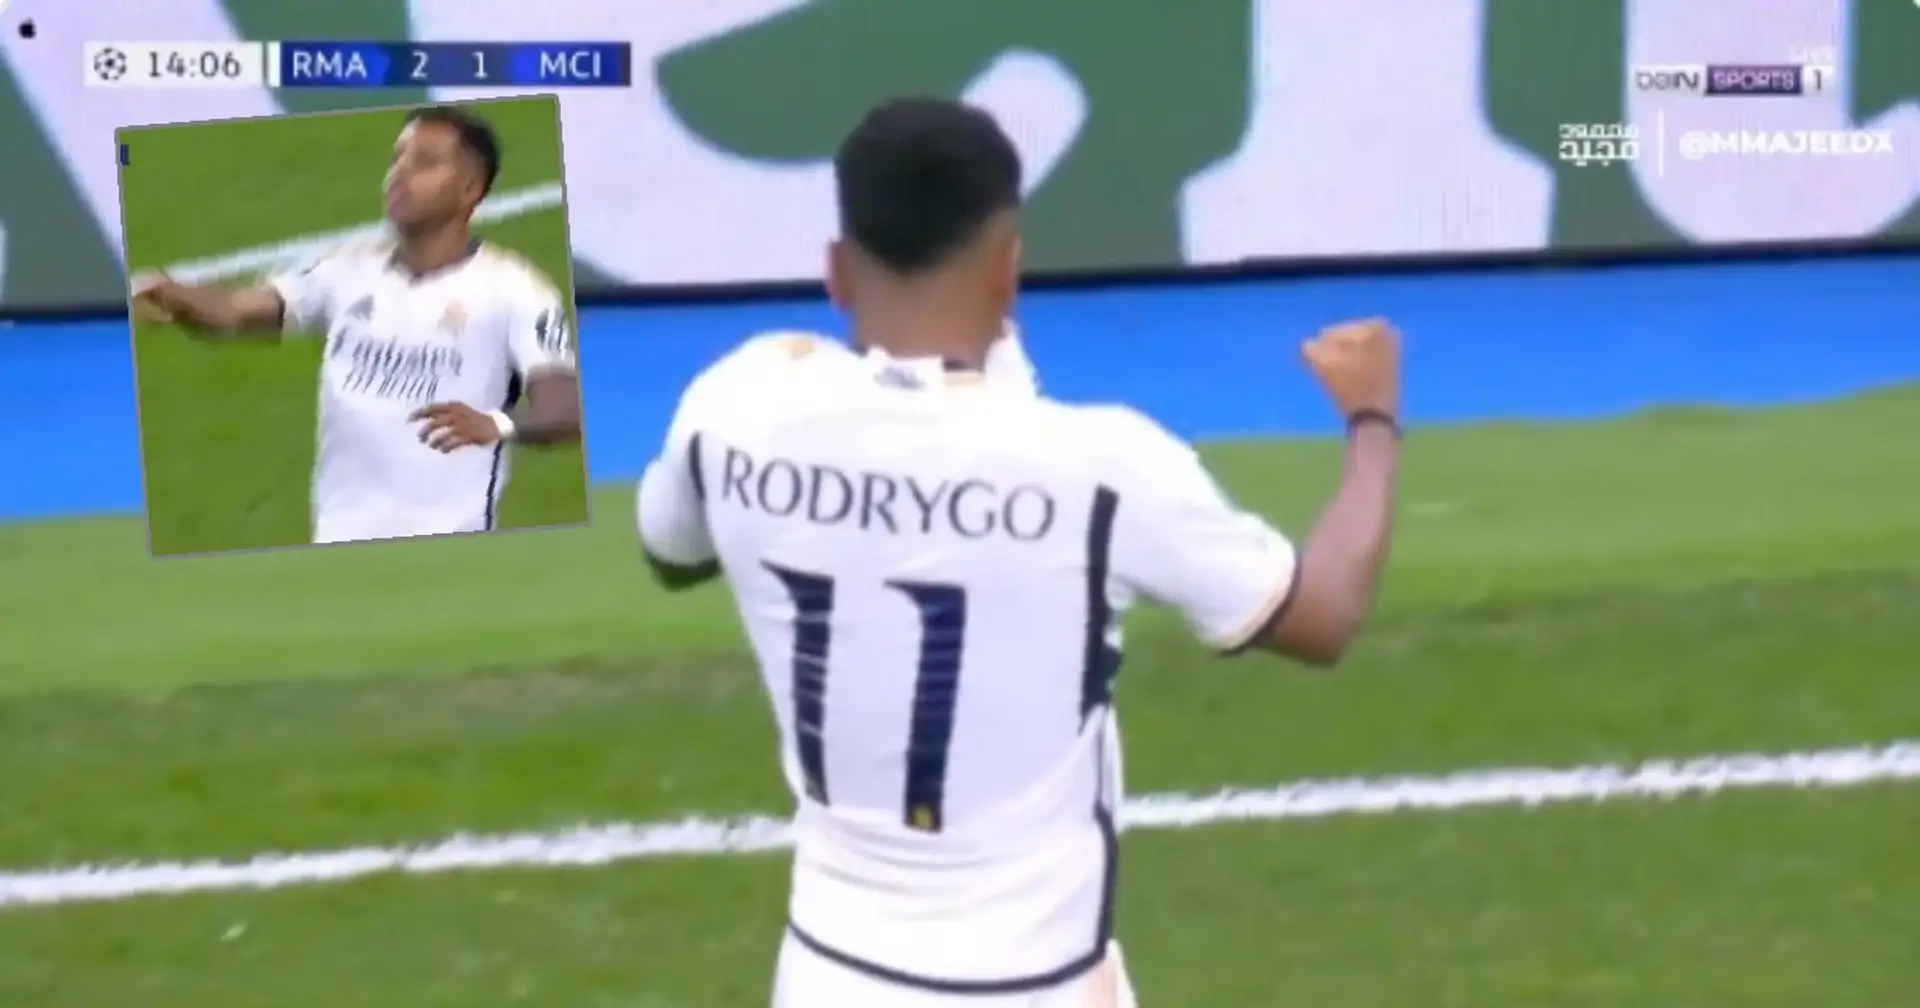 SPOTTED: Rodrygo's beautiful gesture to Real Madrid fans after goal